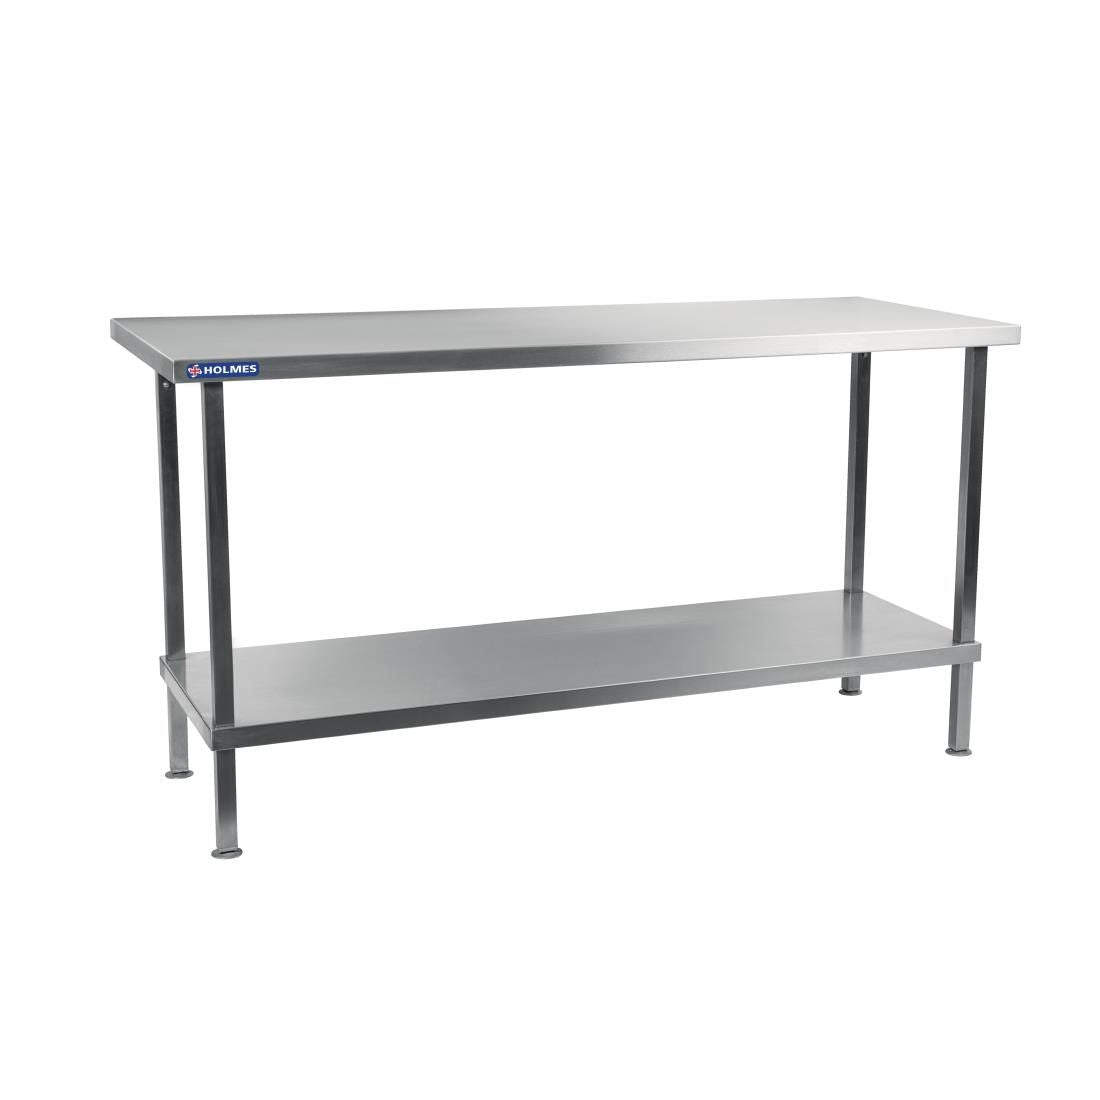 Holmes Stainless Steel Centre Table 2100mm - DR046